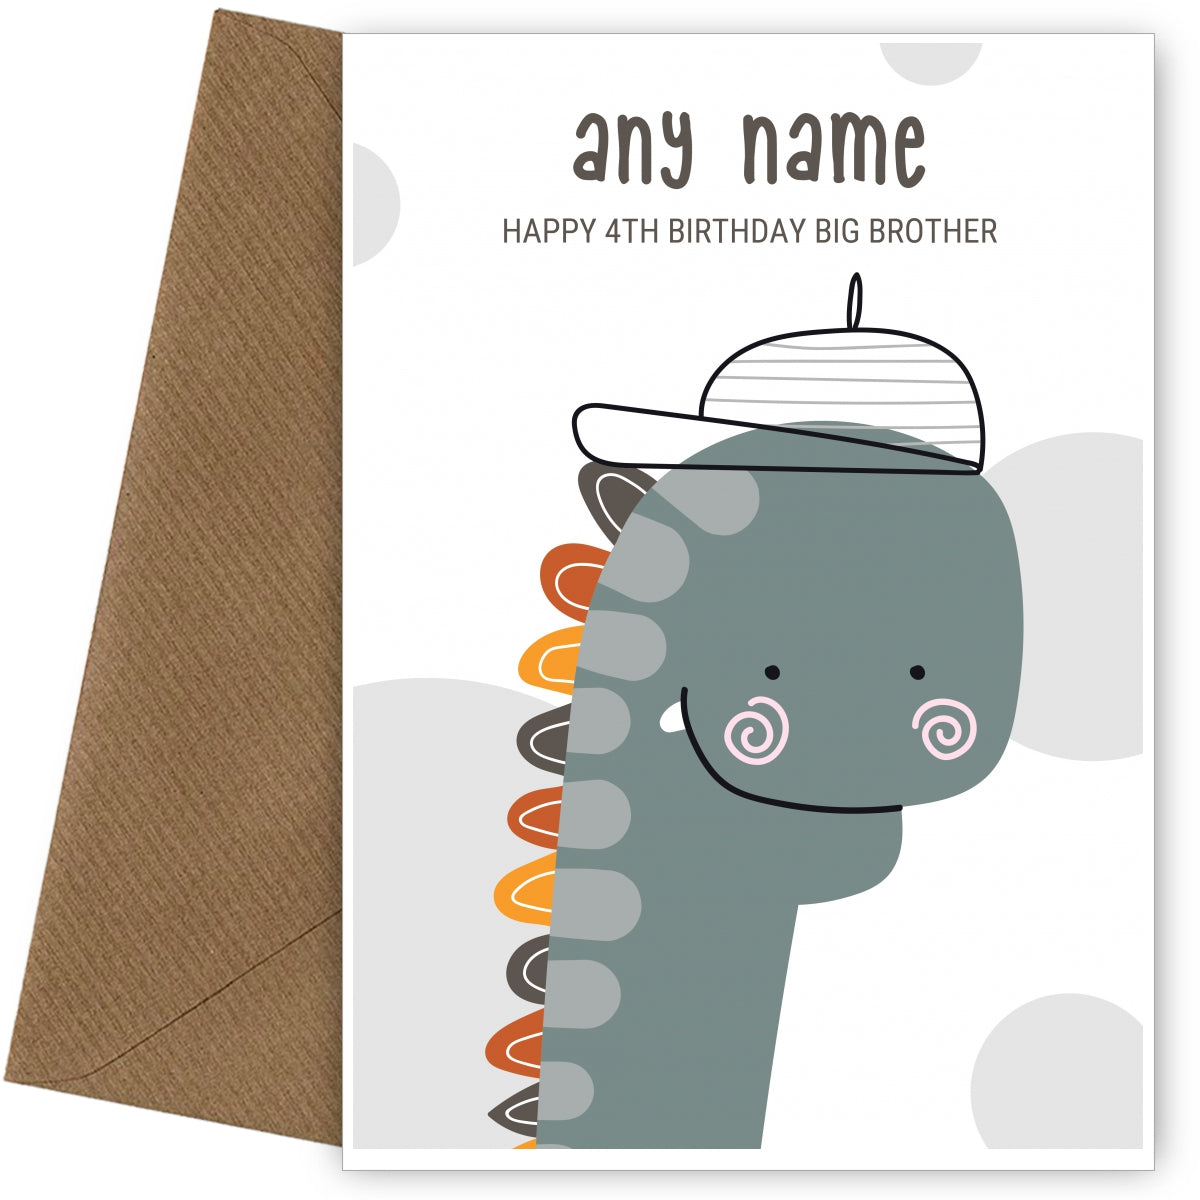 Happy 4th Birthday Card for Big Brother - Dinosaur with Cap